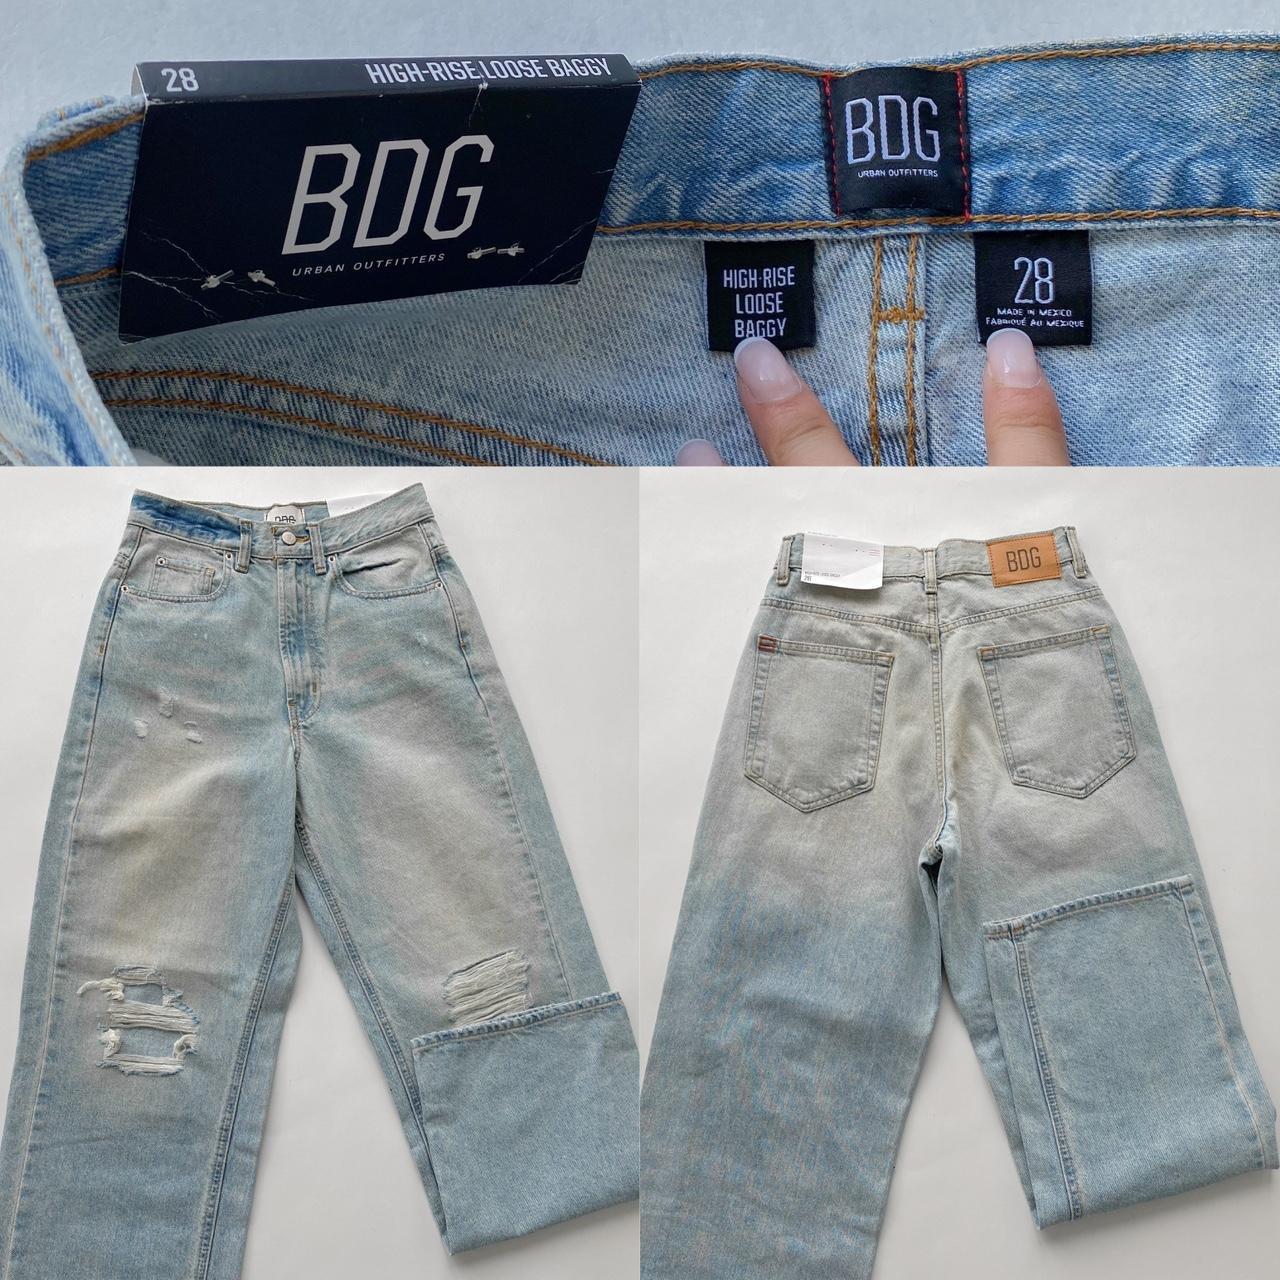 BDG Urban Outfitters Women's 28 High Rise Baggy Fit Jeans Medium Wash Blue  Denim